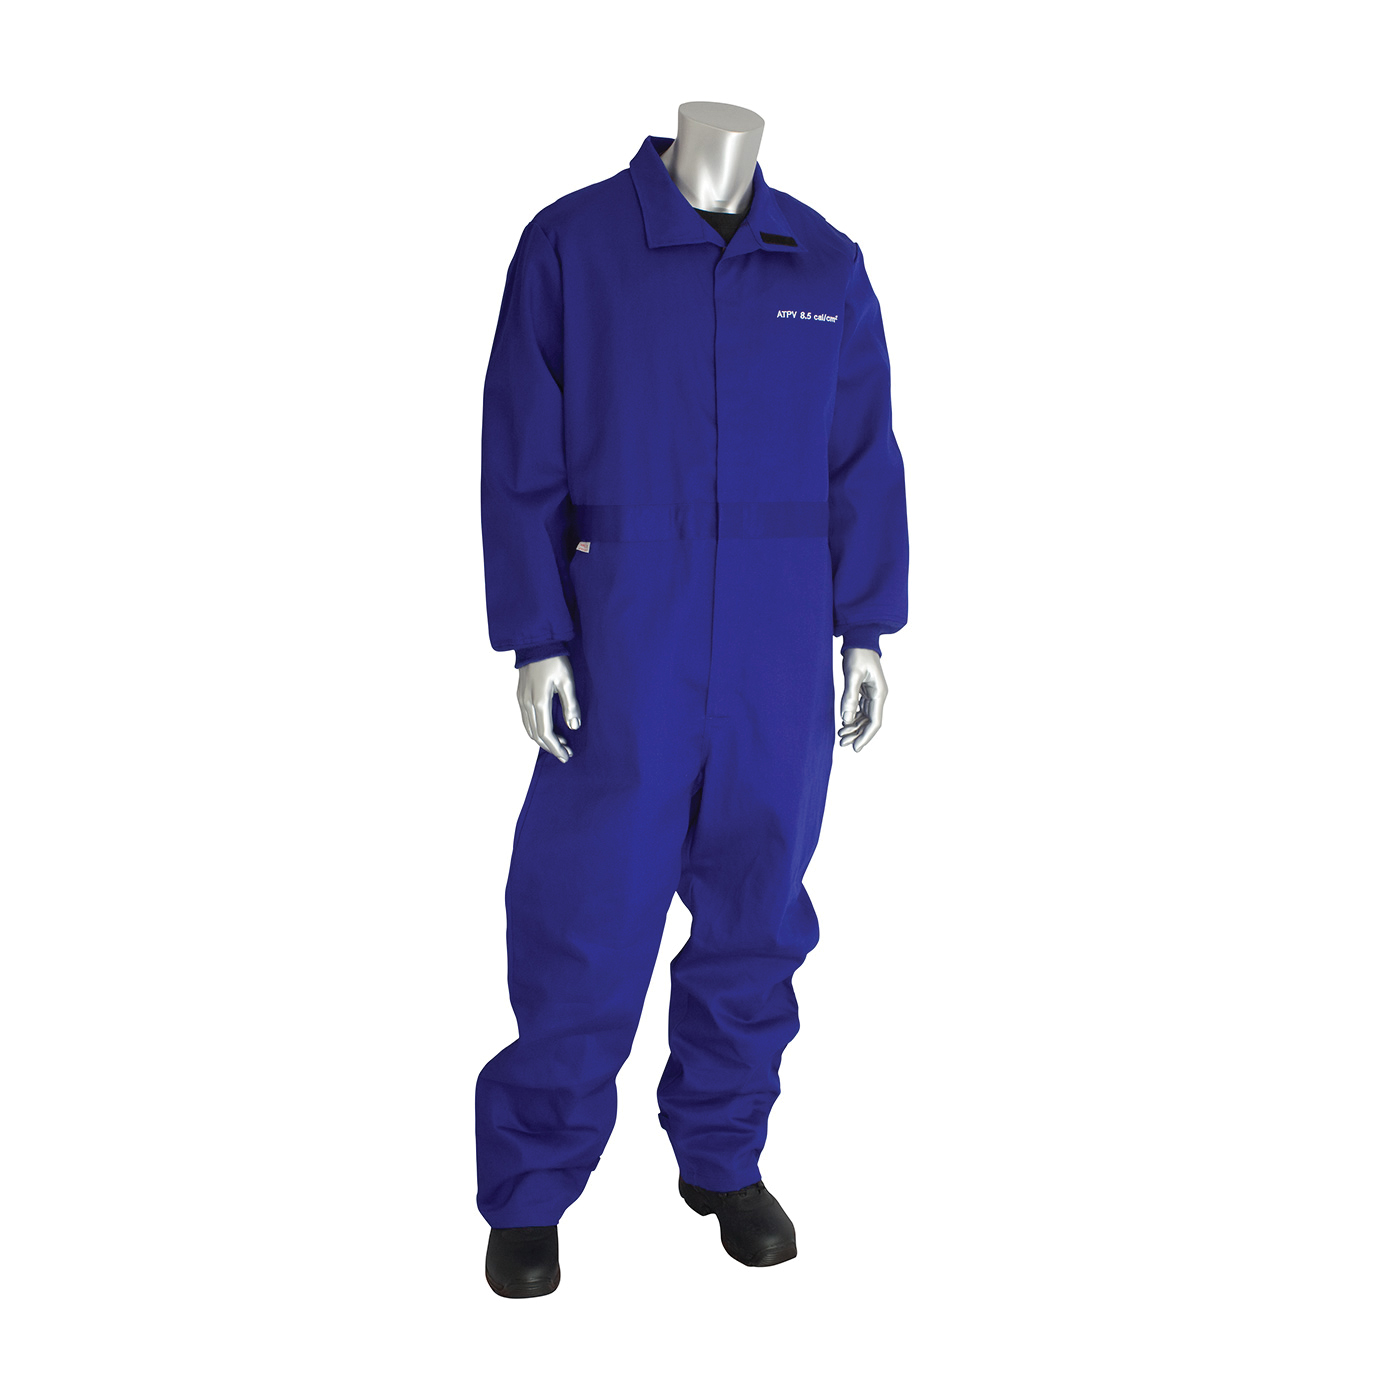 PIP® 9100-2120D/S Flame Resistant Coverall With Vented Back, S, Royal Blue, 90% Cotton/10% Nylon/FR Twill Weave, 36 to 38 in Chest, 32 in L Inseam